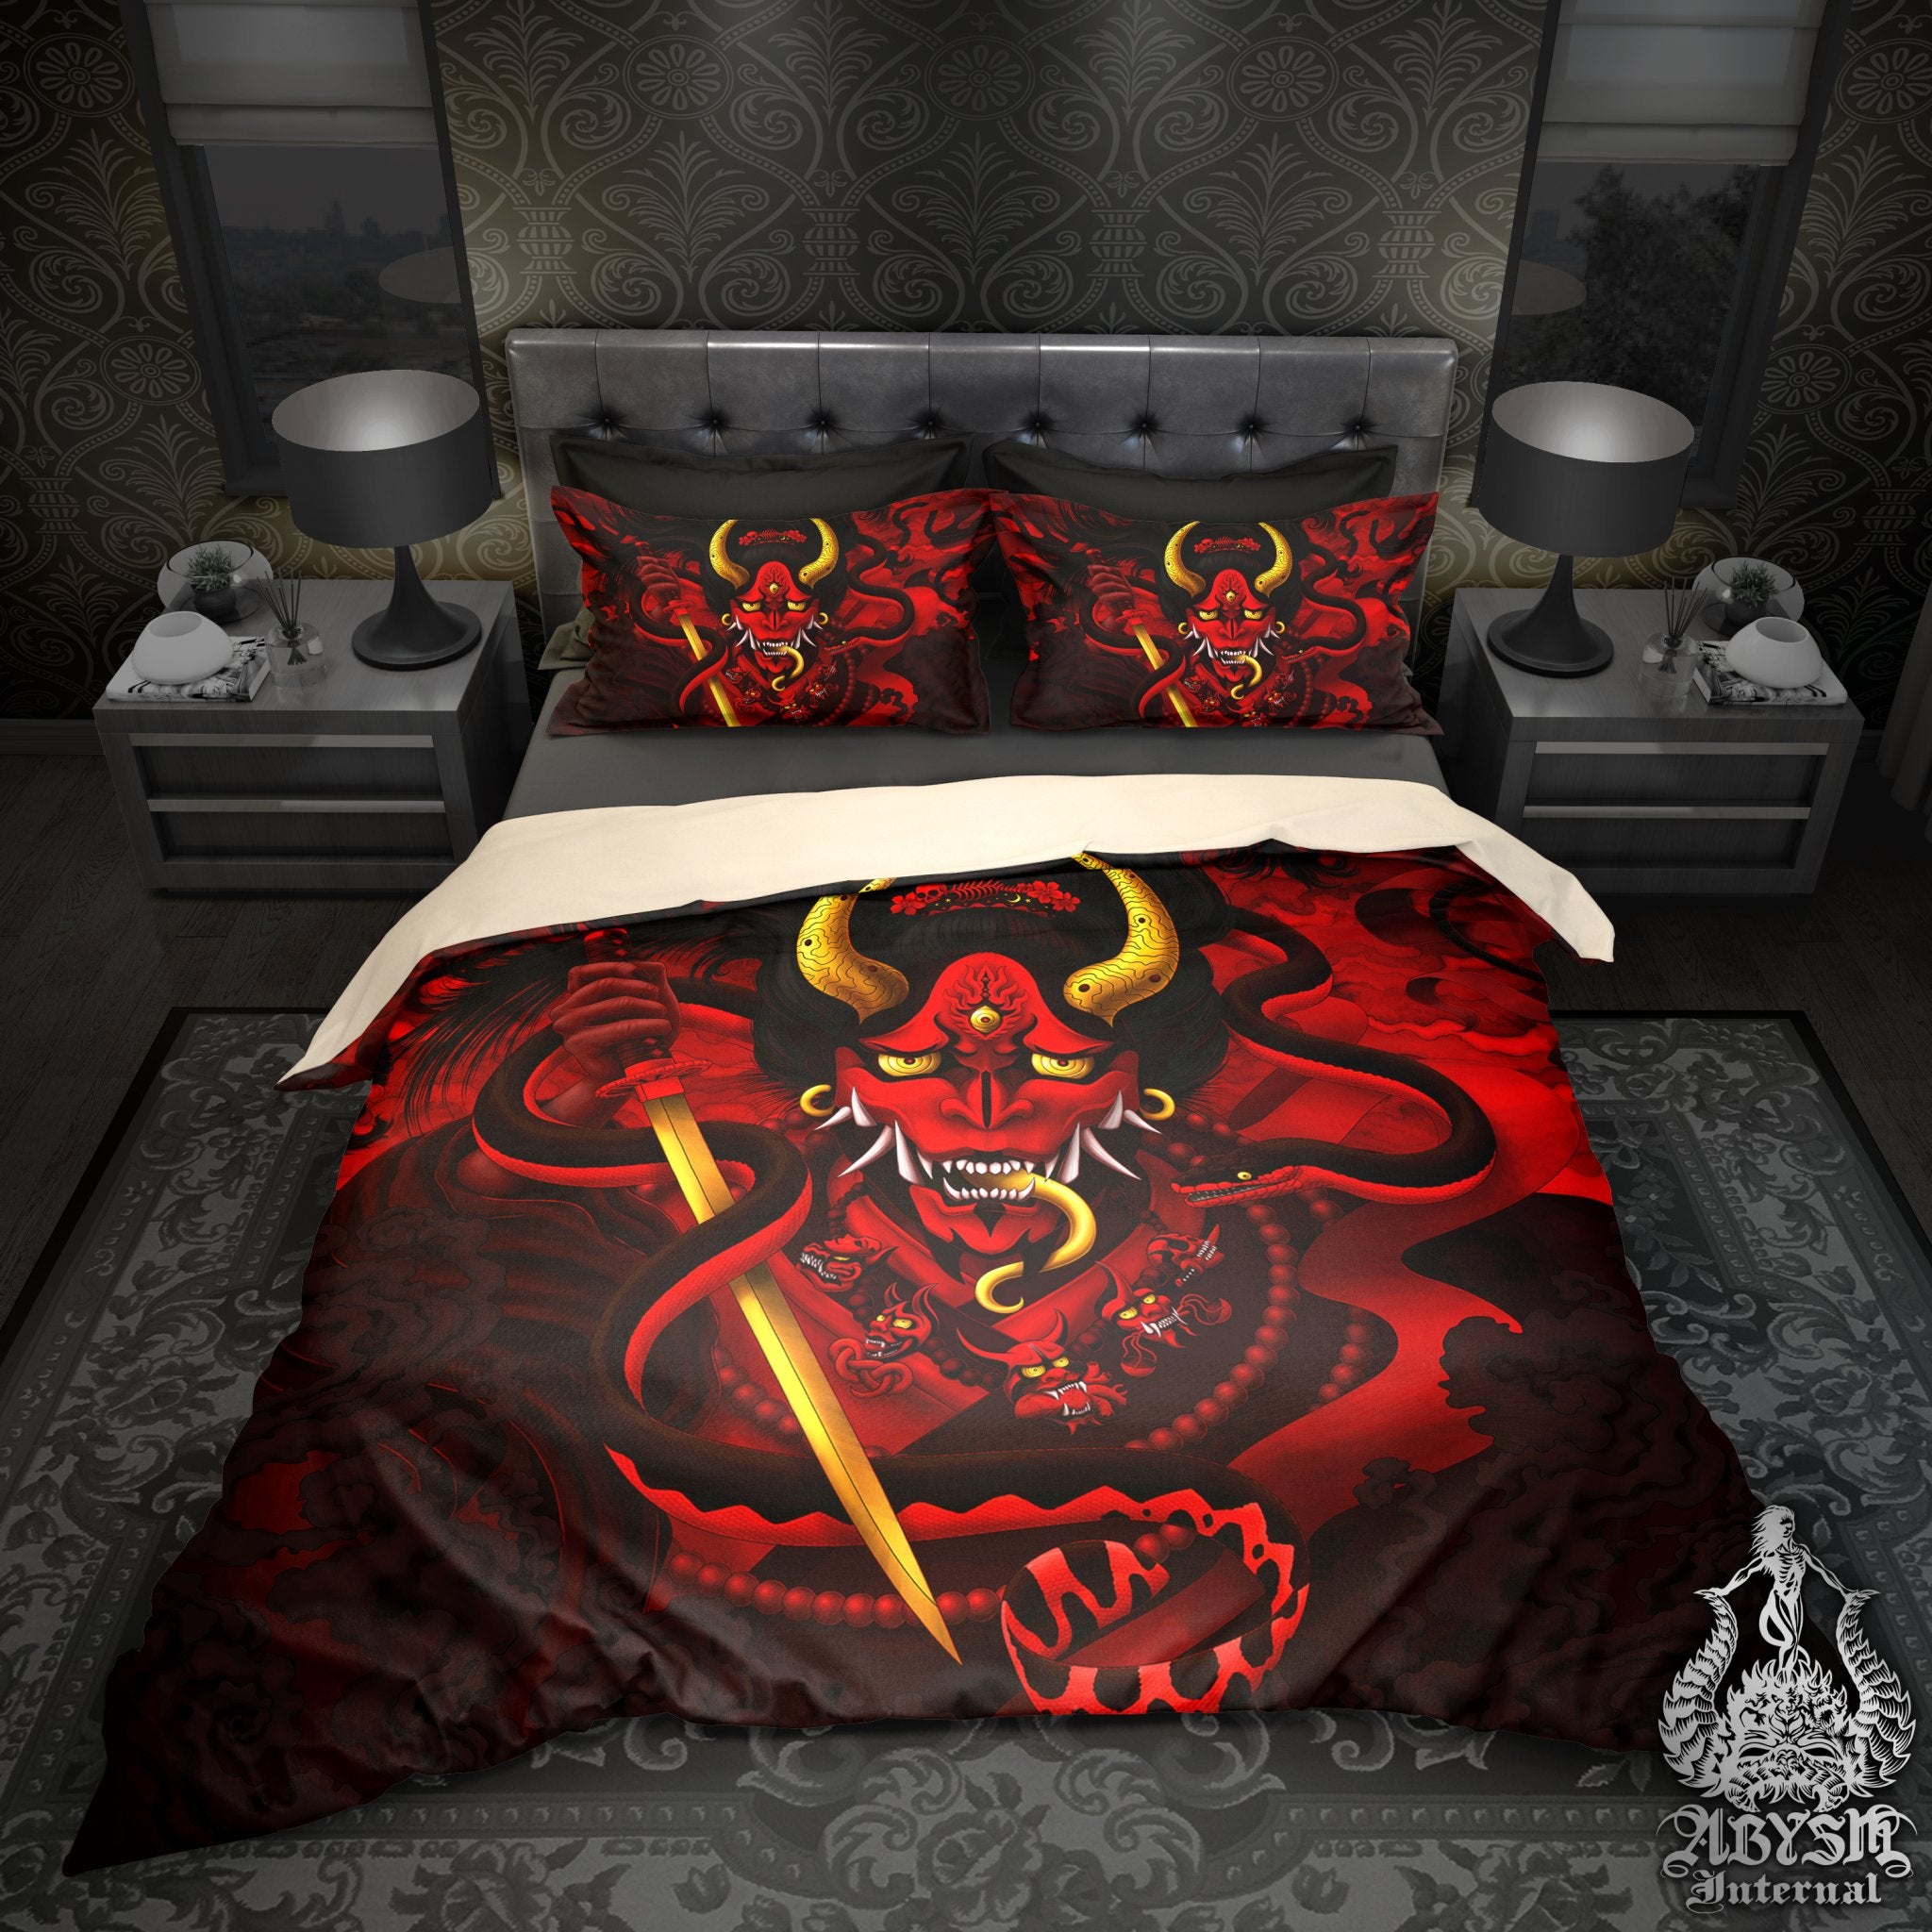 Bloody Gothic Demon Bedding Set, Comforter or Duvet, Japanese Hannya Bed Cover, Goth Anime Bedroom Decor, King, Queen & Twin Size - Red Snake - Abysm Internal